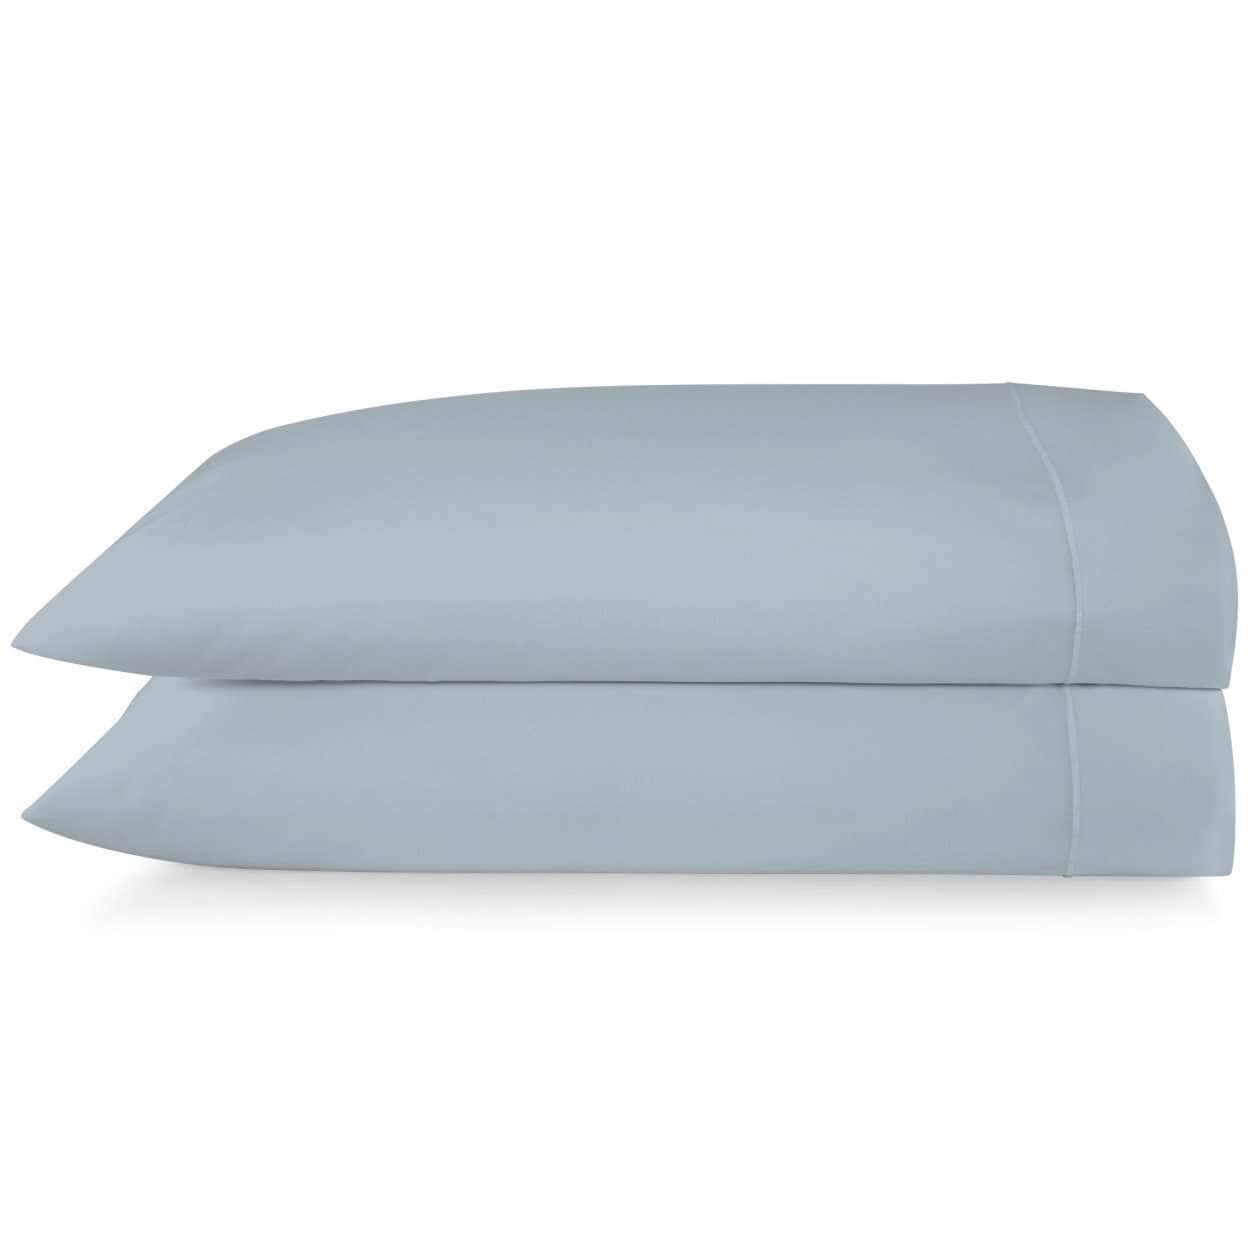 Sheets Soprano Pillowcase Pair by Peacock Alley Standard 20x30 / Blue Peacock Alley